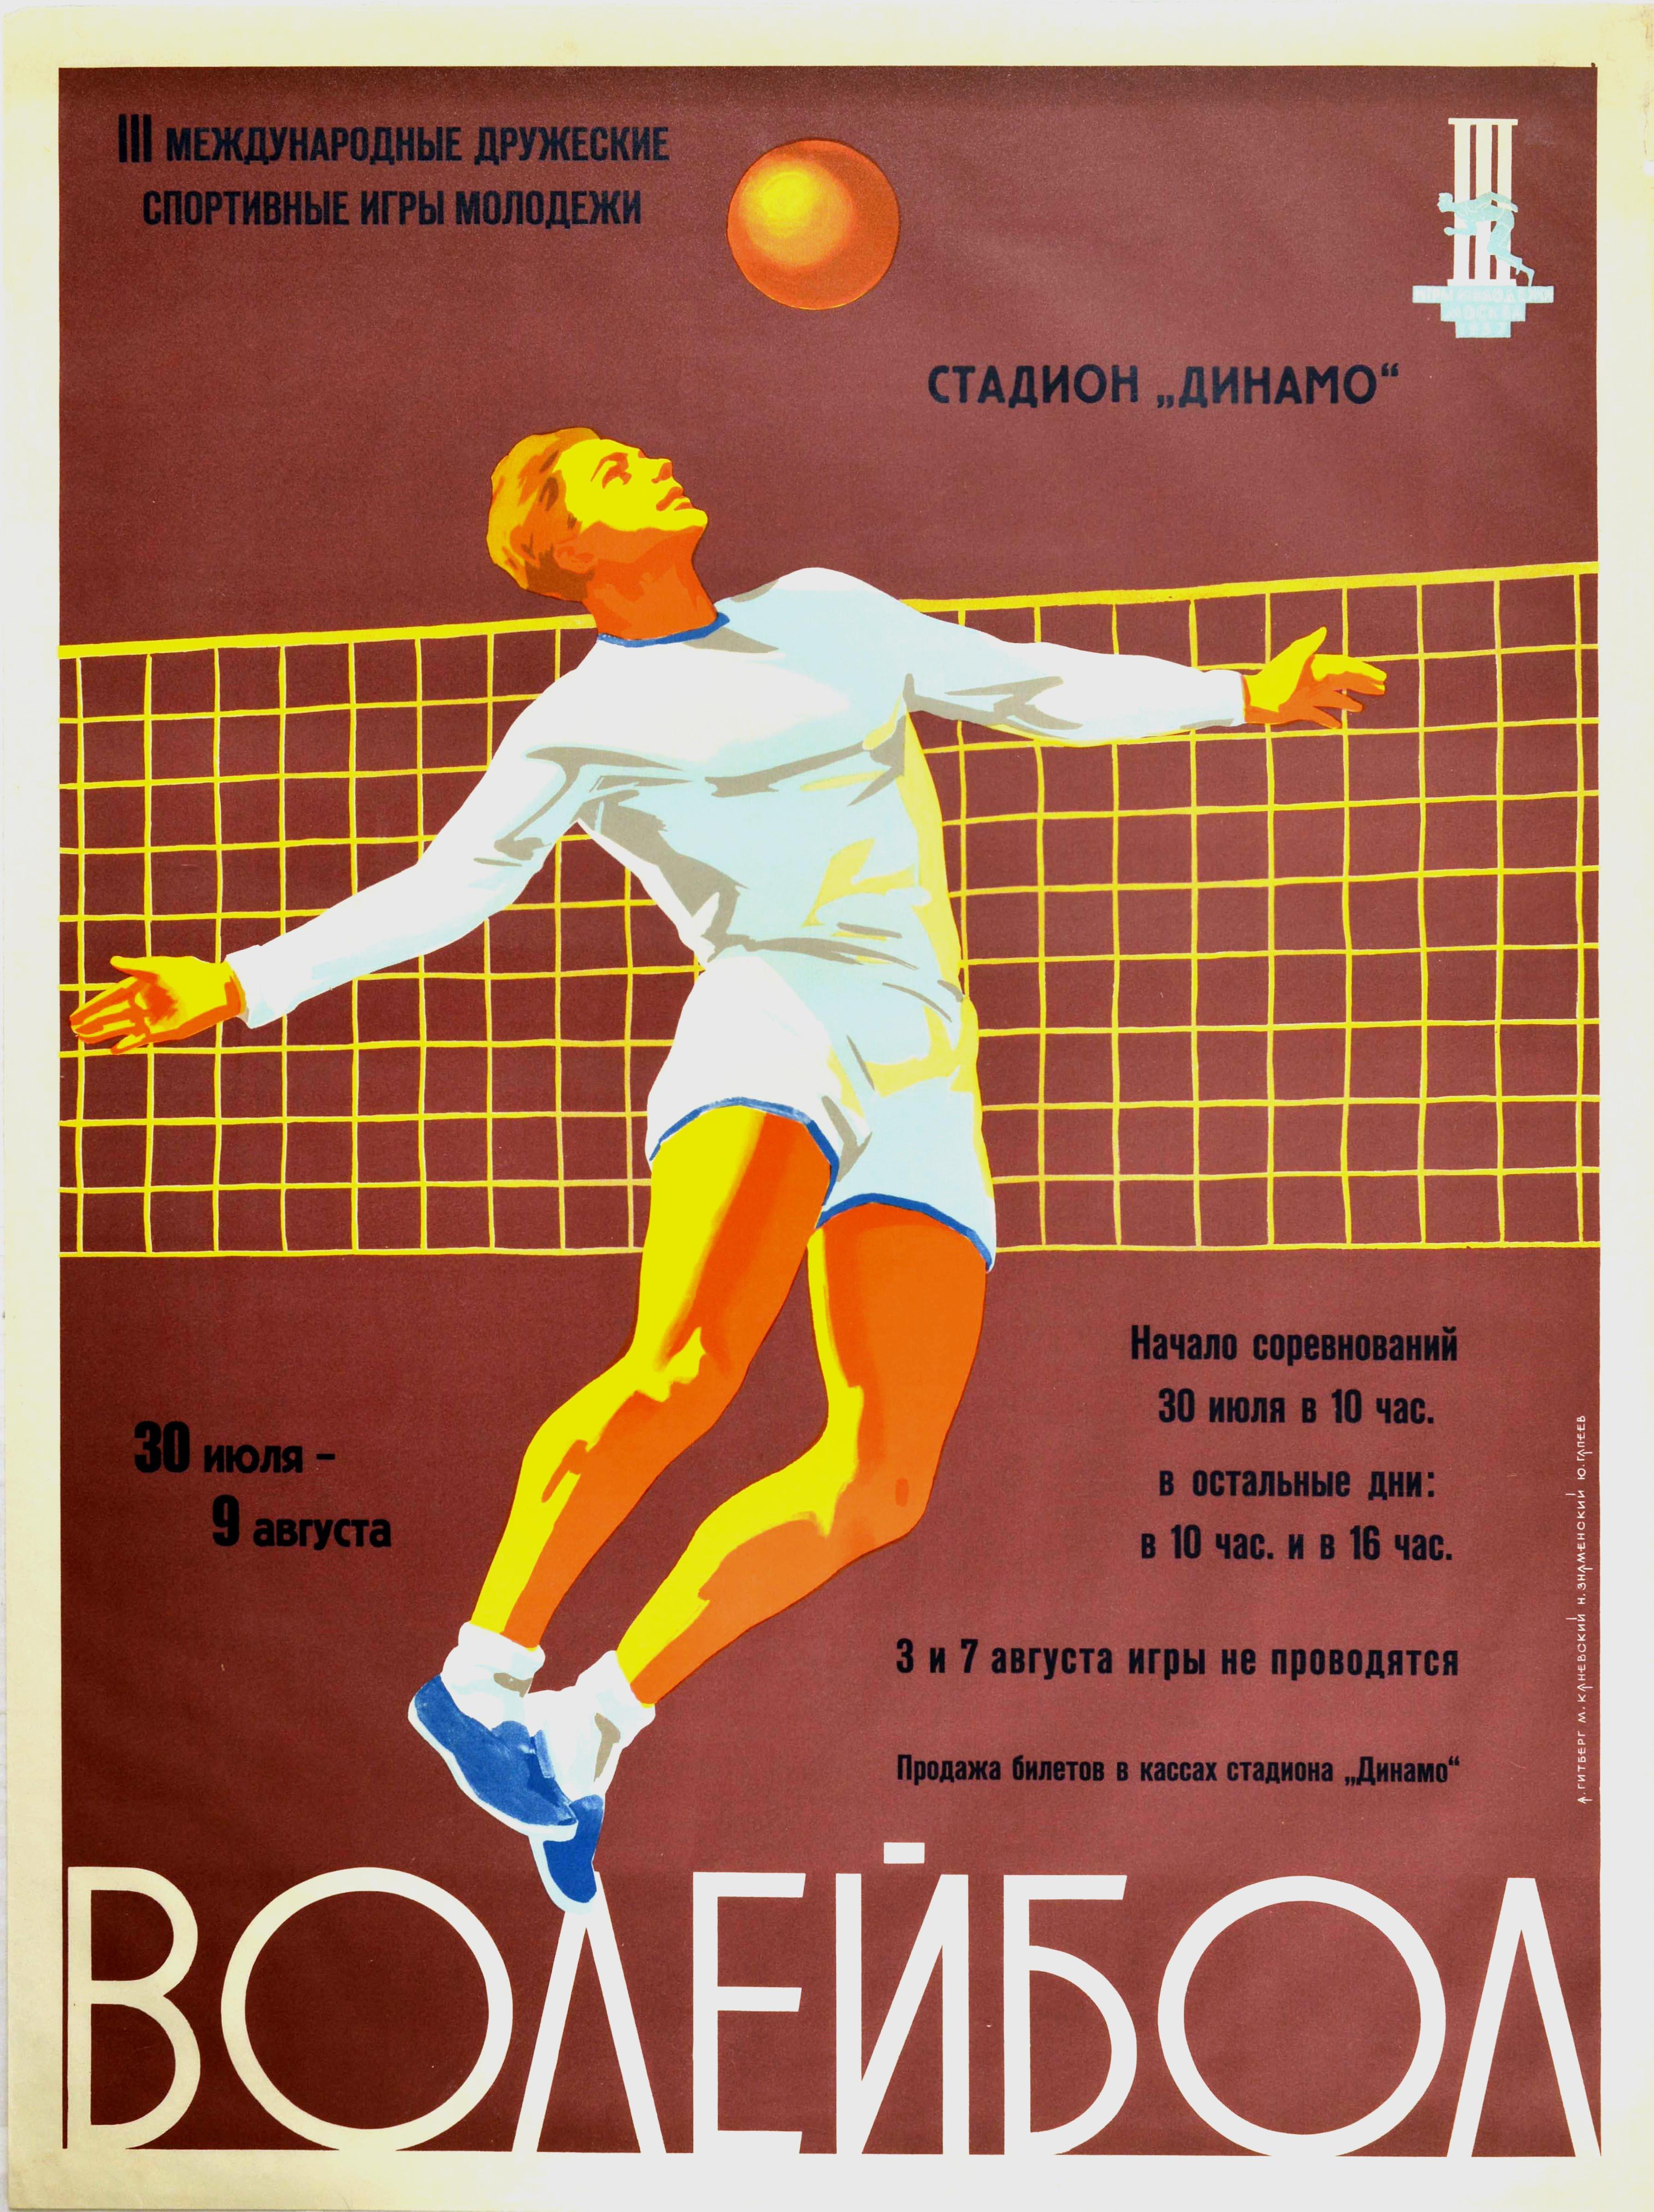 Unknown Print - Original Vintage Poster Volleyball Friendship Moscow Youth Games Dynamo Stadium